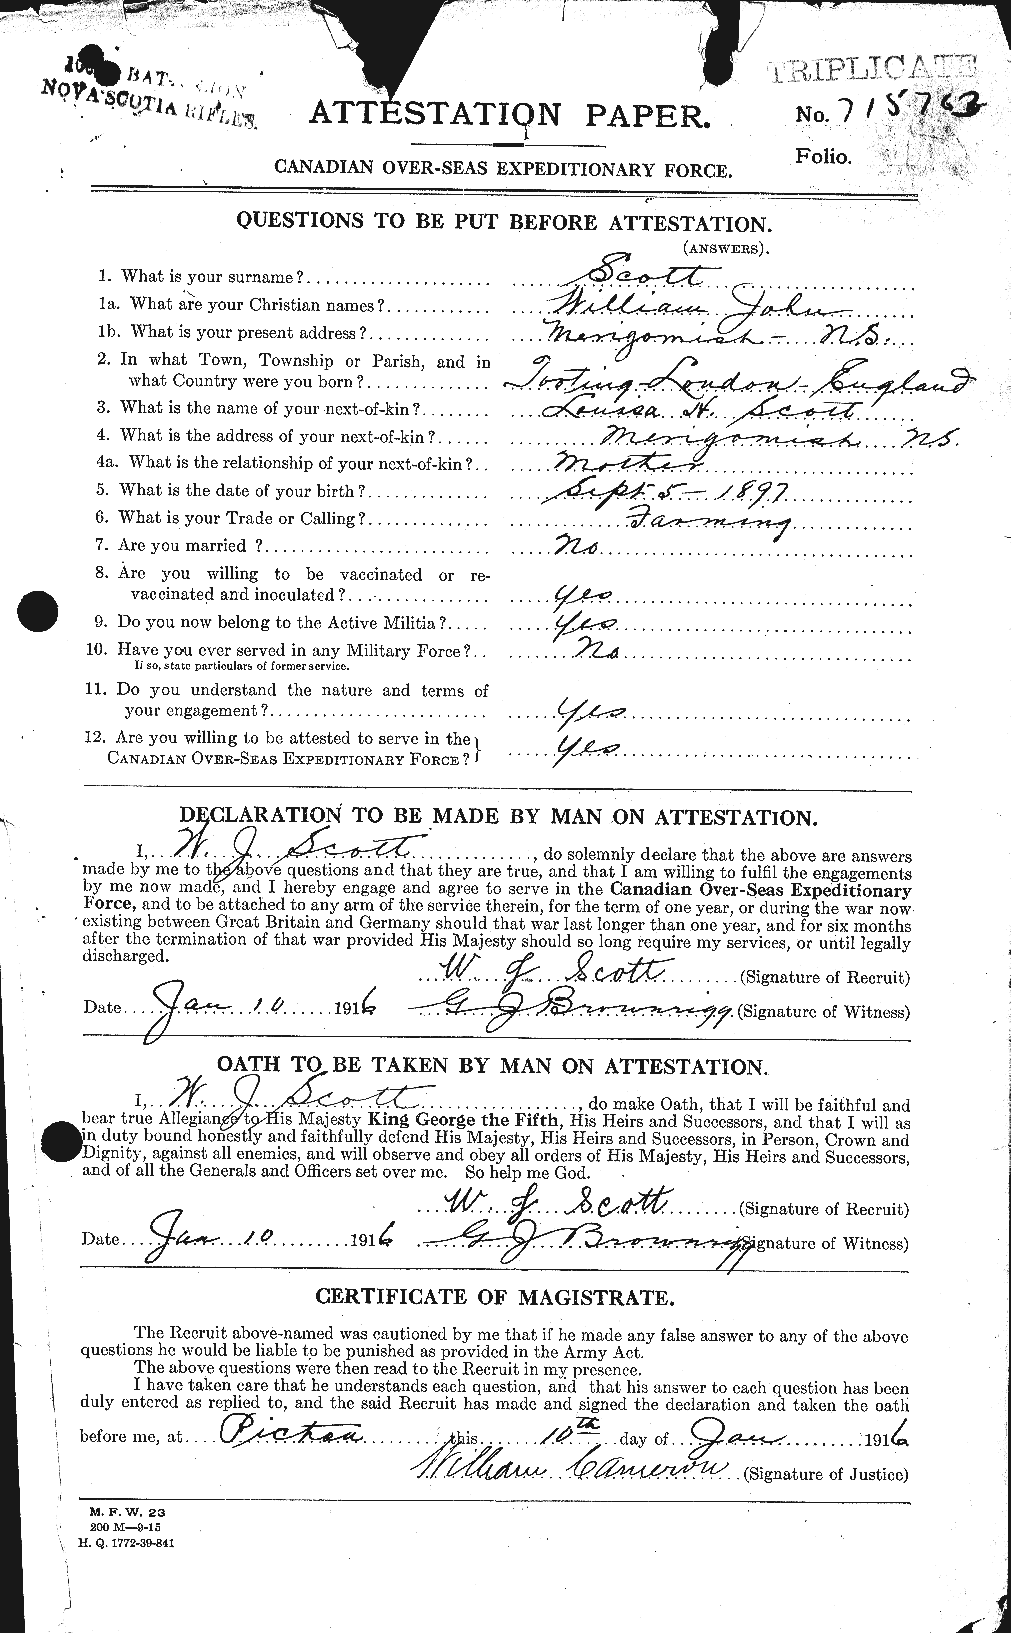 Personnel Records of the First World War - CEF 086755a